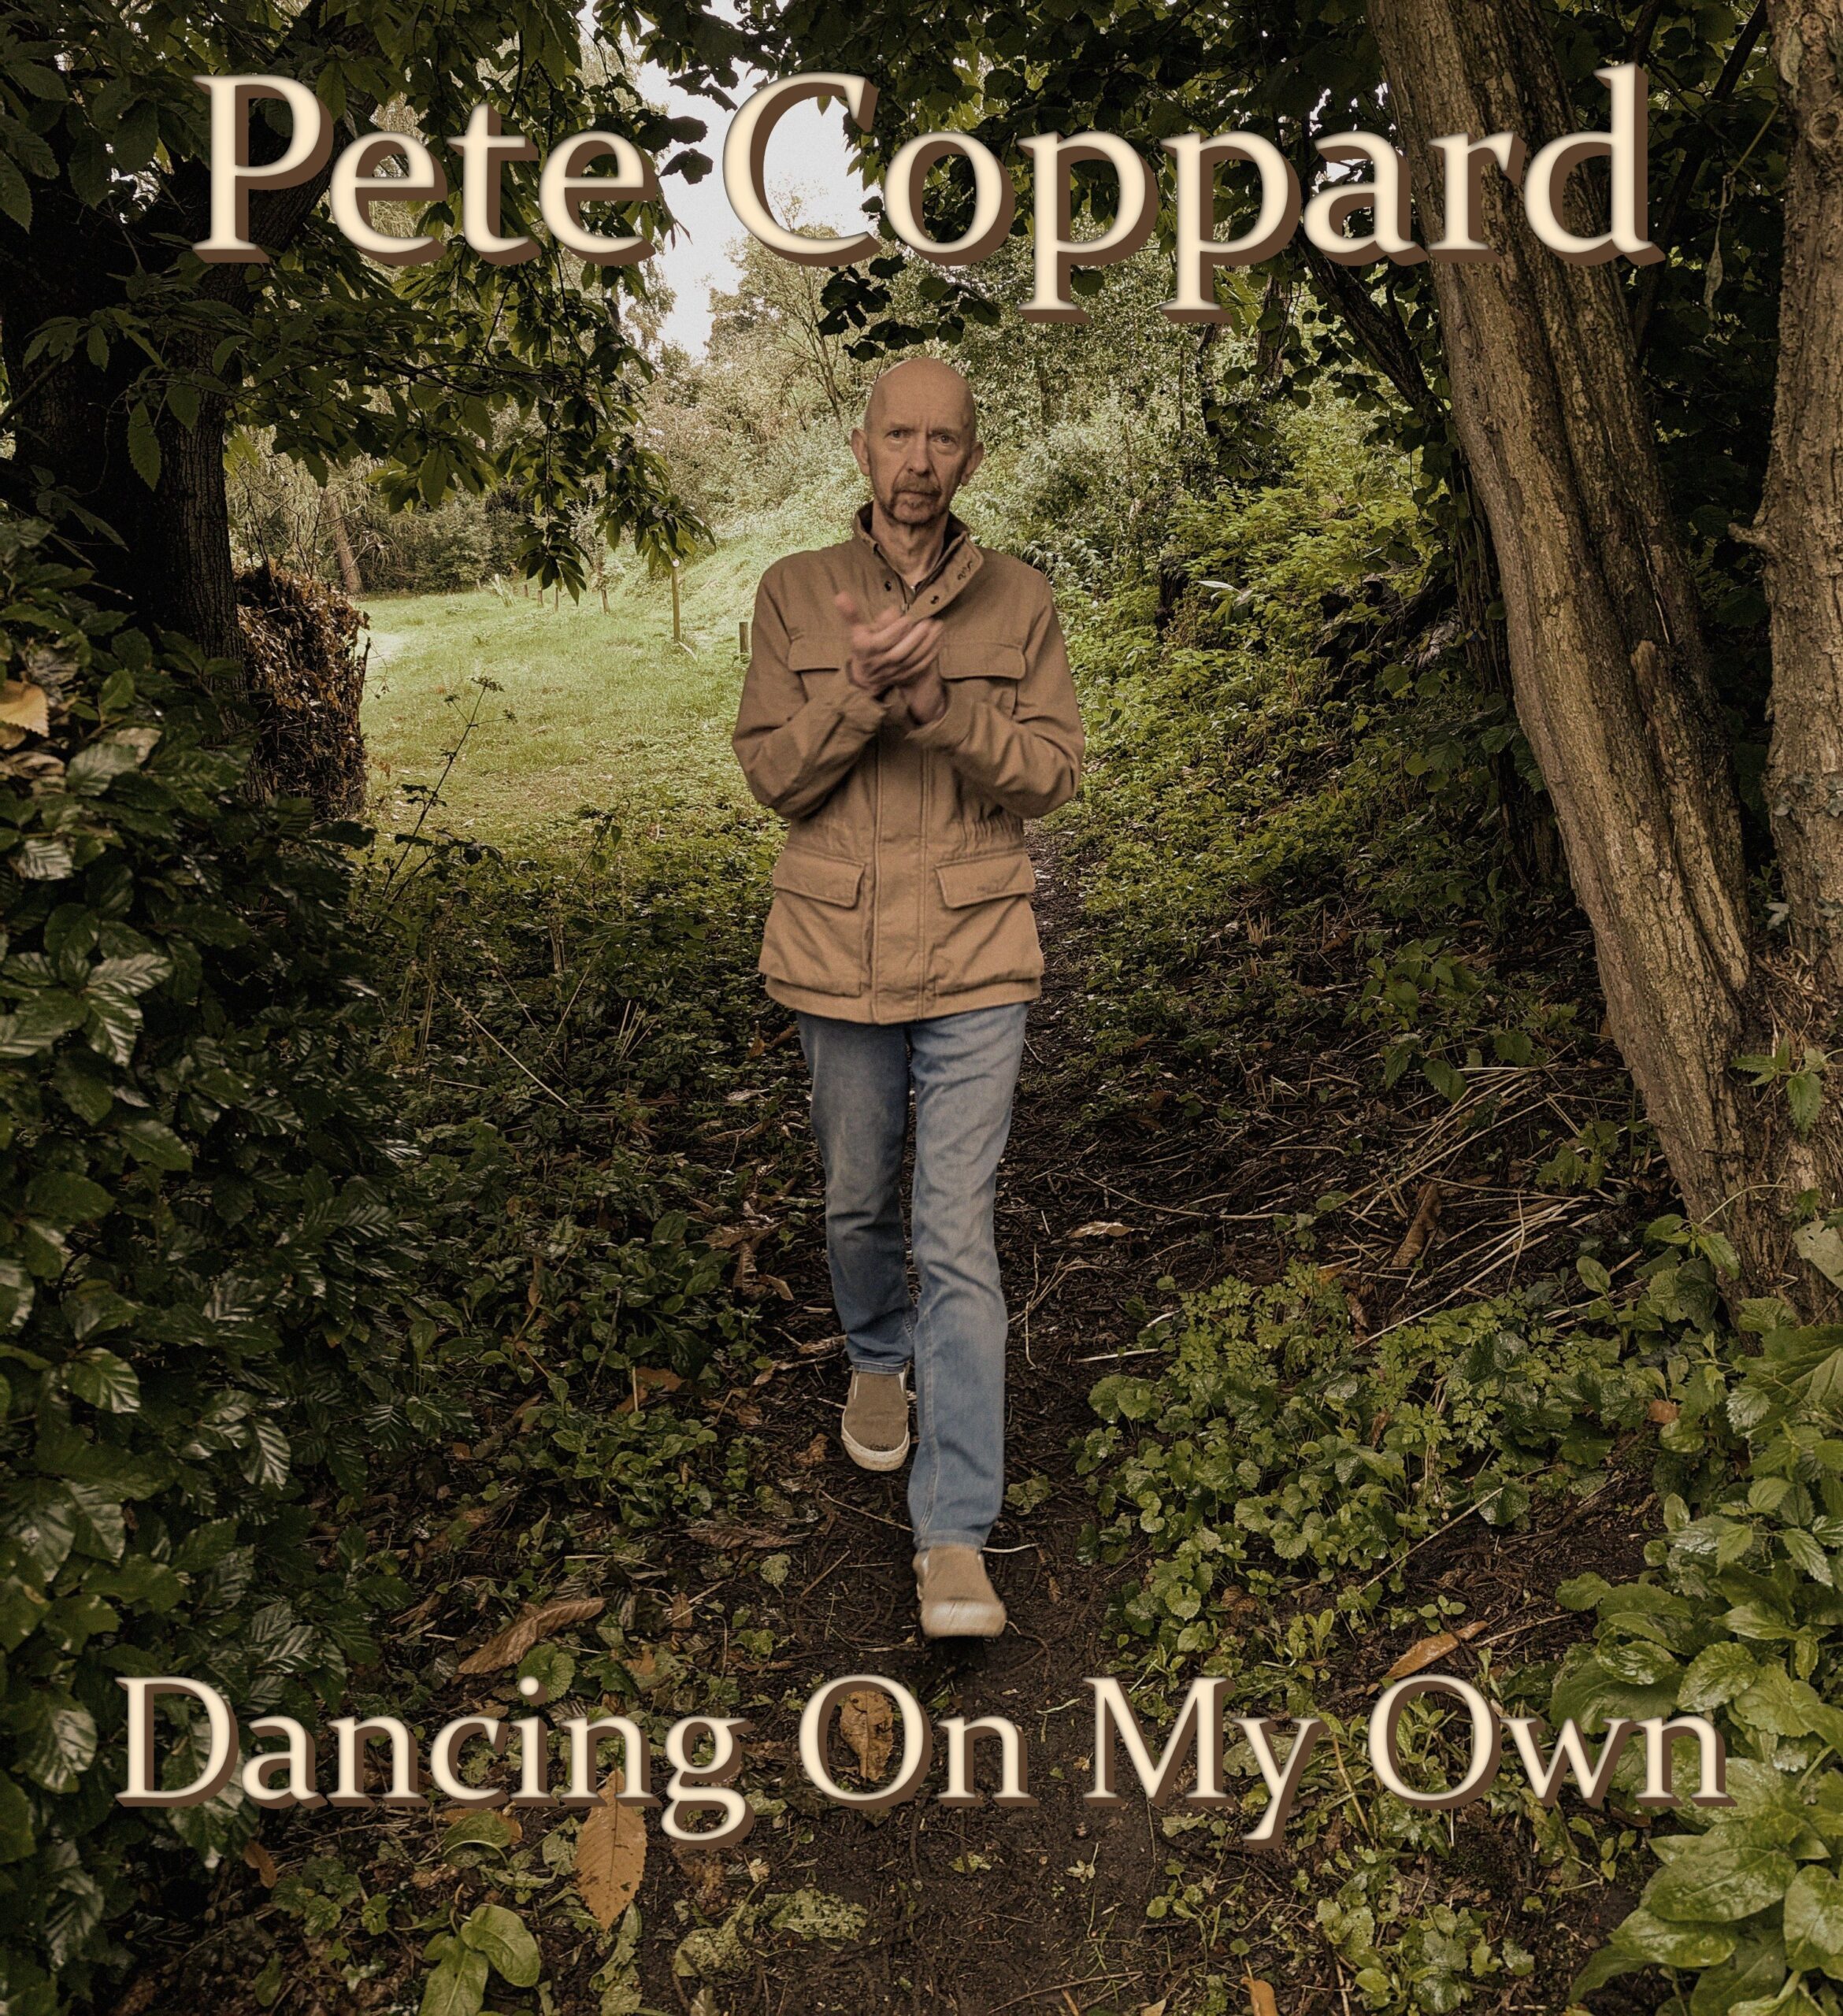 Pete Coppard’s “Dancing On My Own”: A Captivating Pop Anthem of Resilience